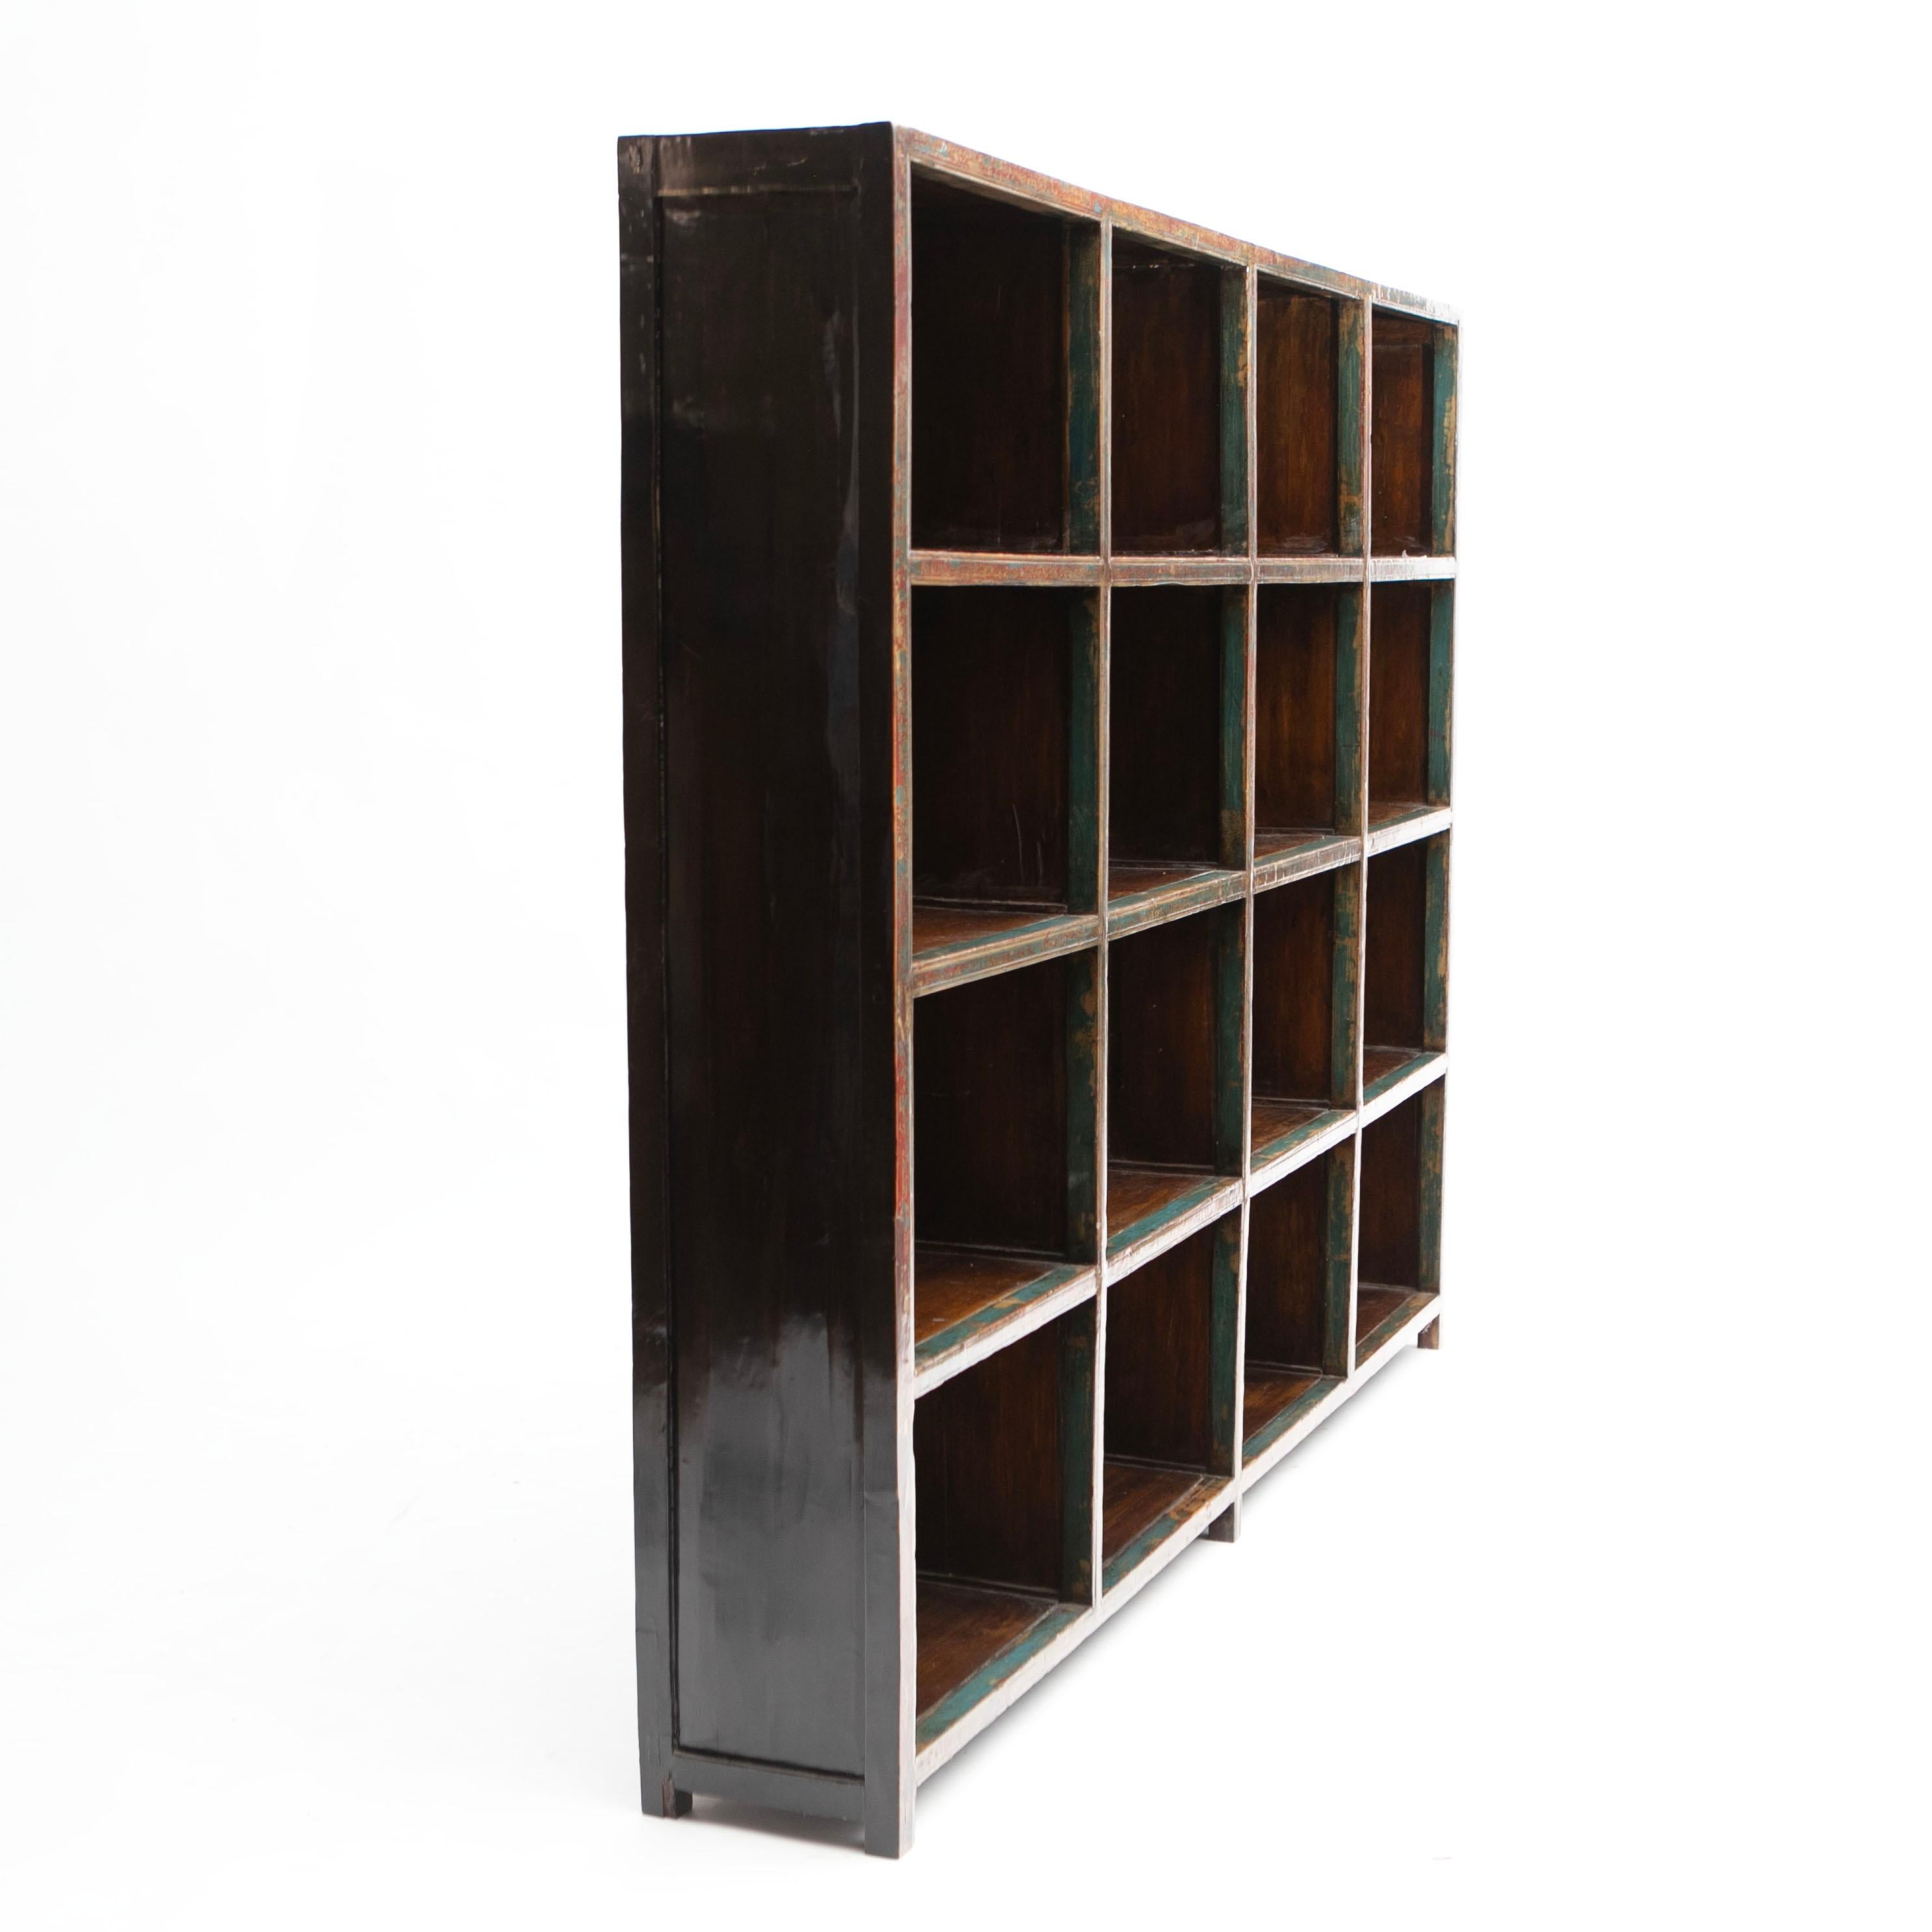 A large early 20th-century elm wood bookcase from China.
This piece features 16 square cubbies (4x4) doubling as shelves.

The lacquer displays a charming age-related patina, with black lacquer on the sides and polychrome lacquer on the front.
(Is